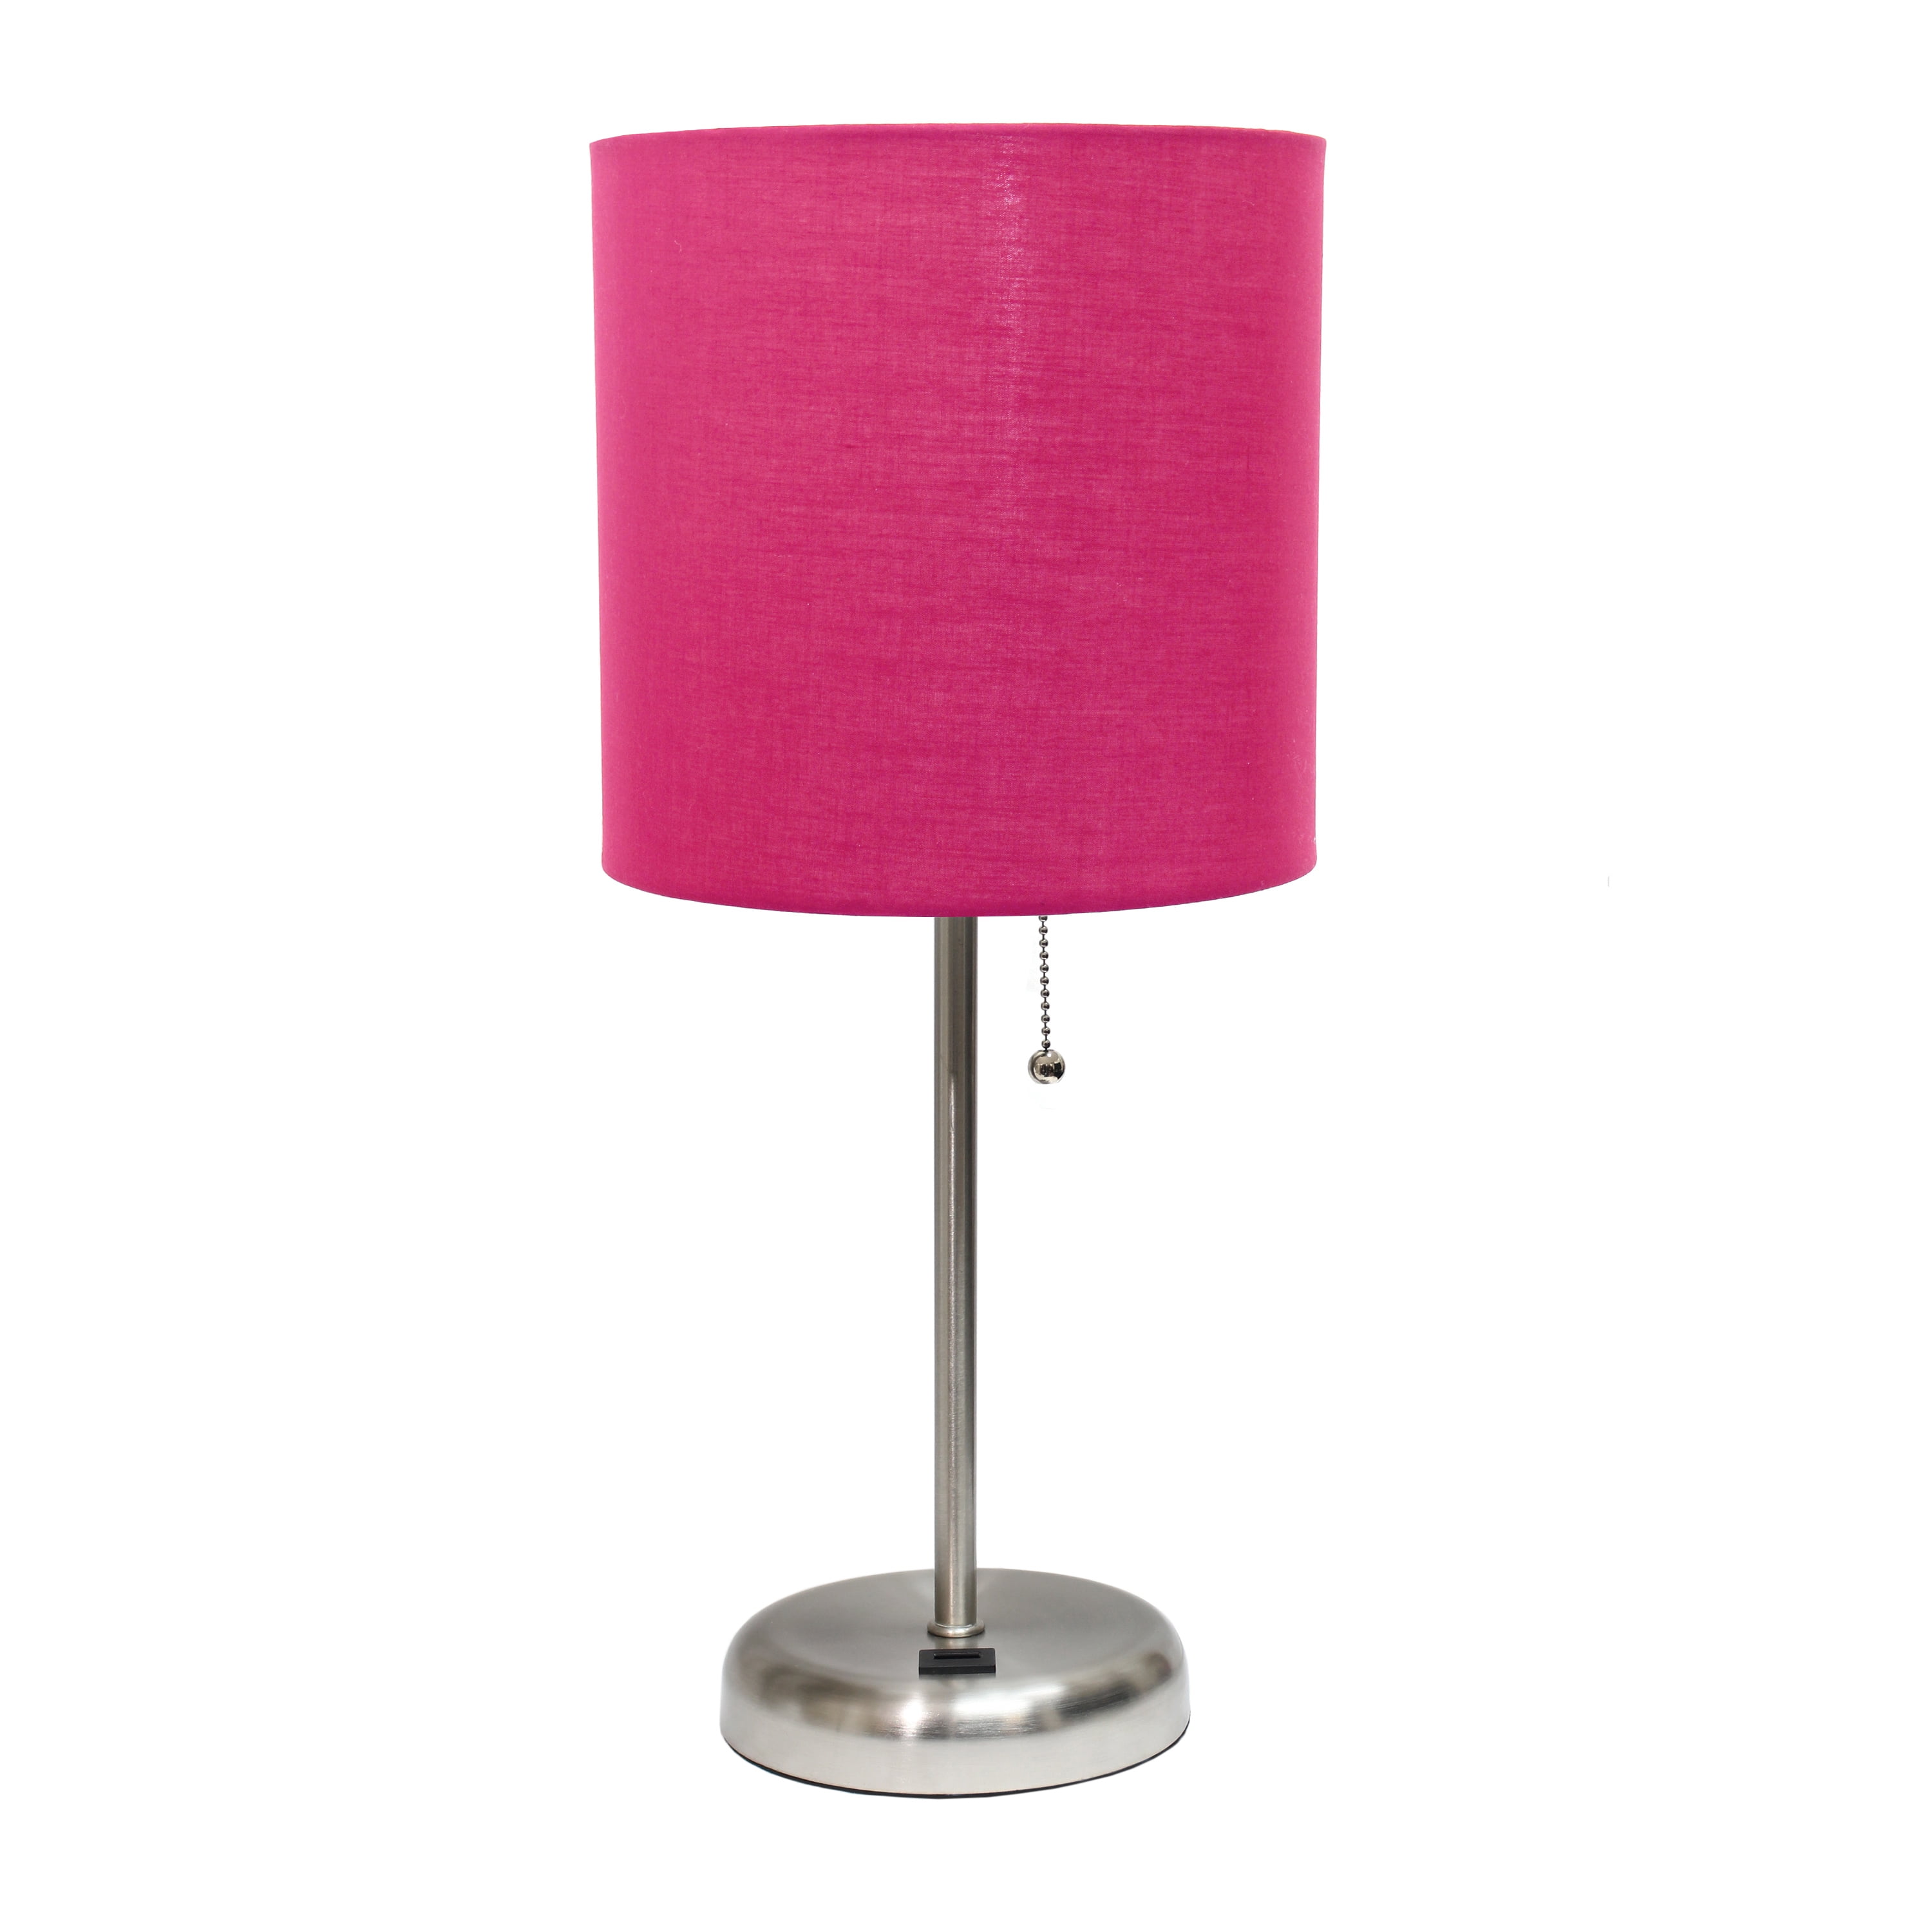 Lt2044-pnk Stick With Usb Charging Port & Fabric Shade Table Lamp, Pink